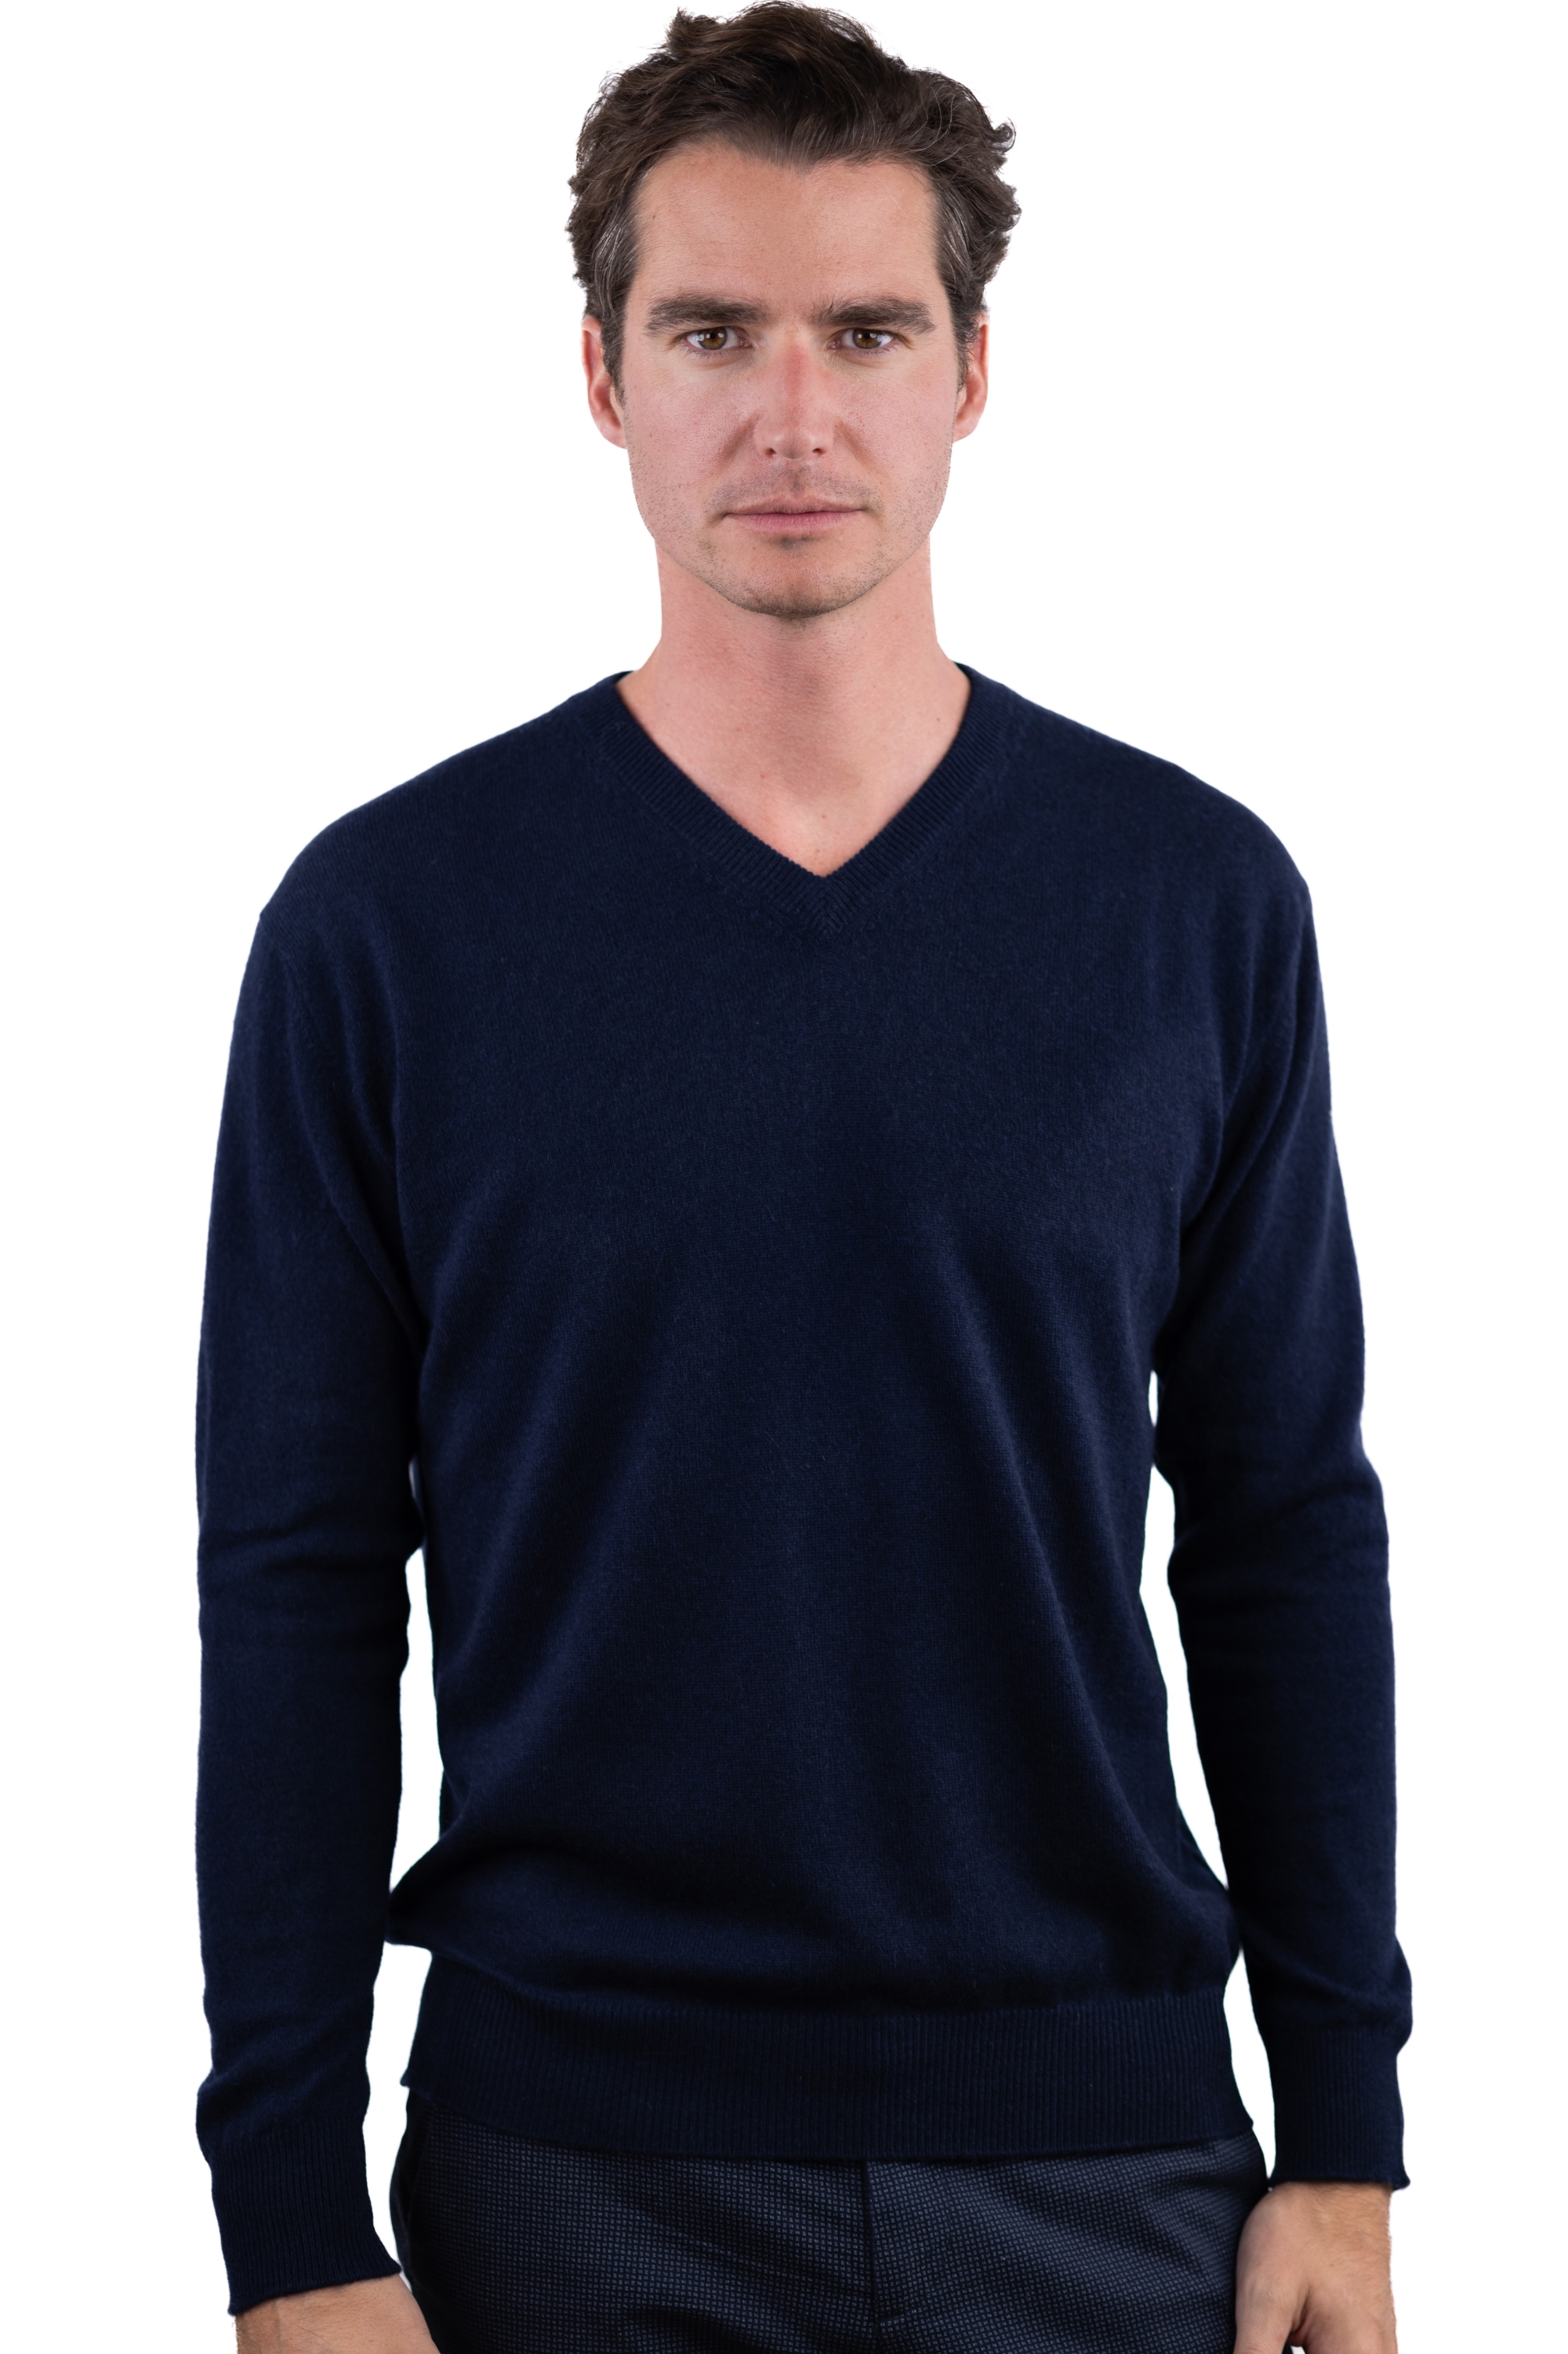 Cachemire pull homme hippolyte marine fonce s